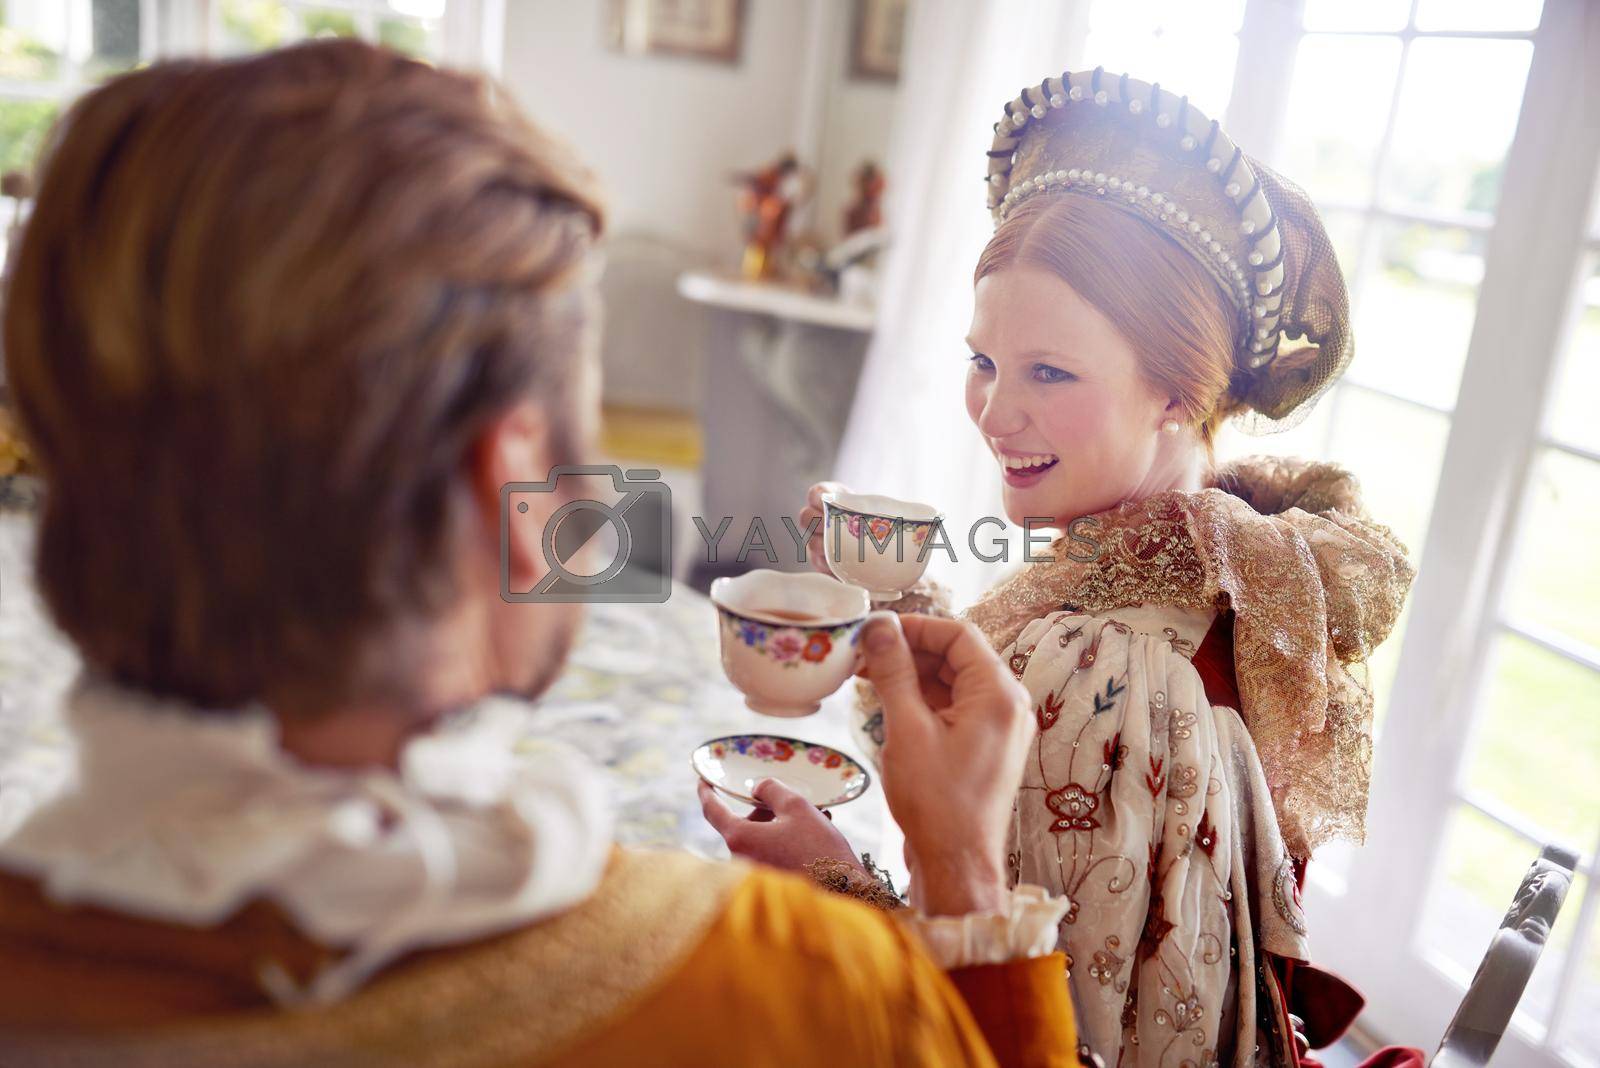 Royalty free image of Living the royal life. A king and queen taking tea together at home. by YuriArcurs